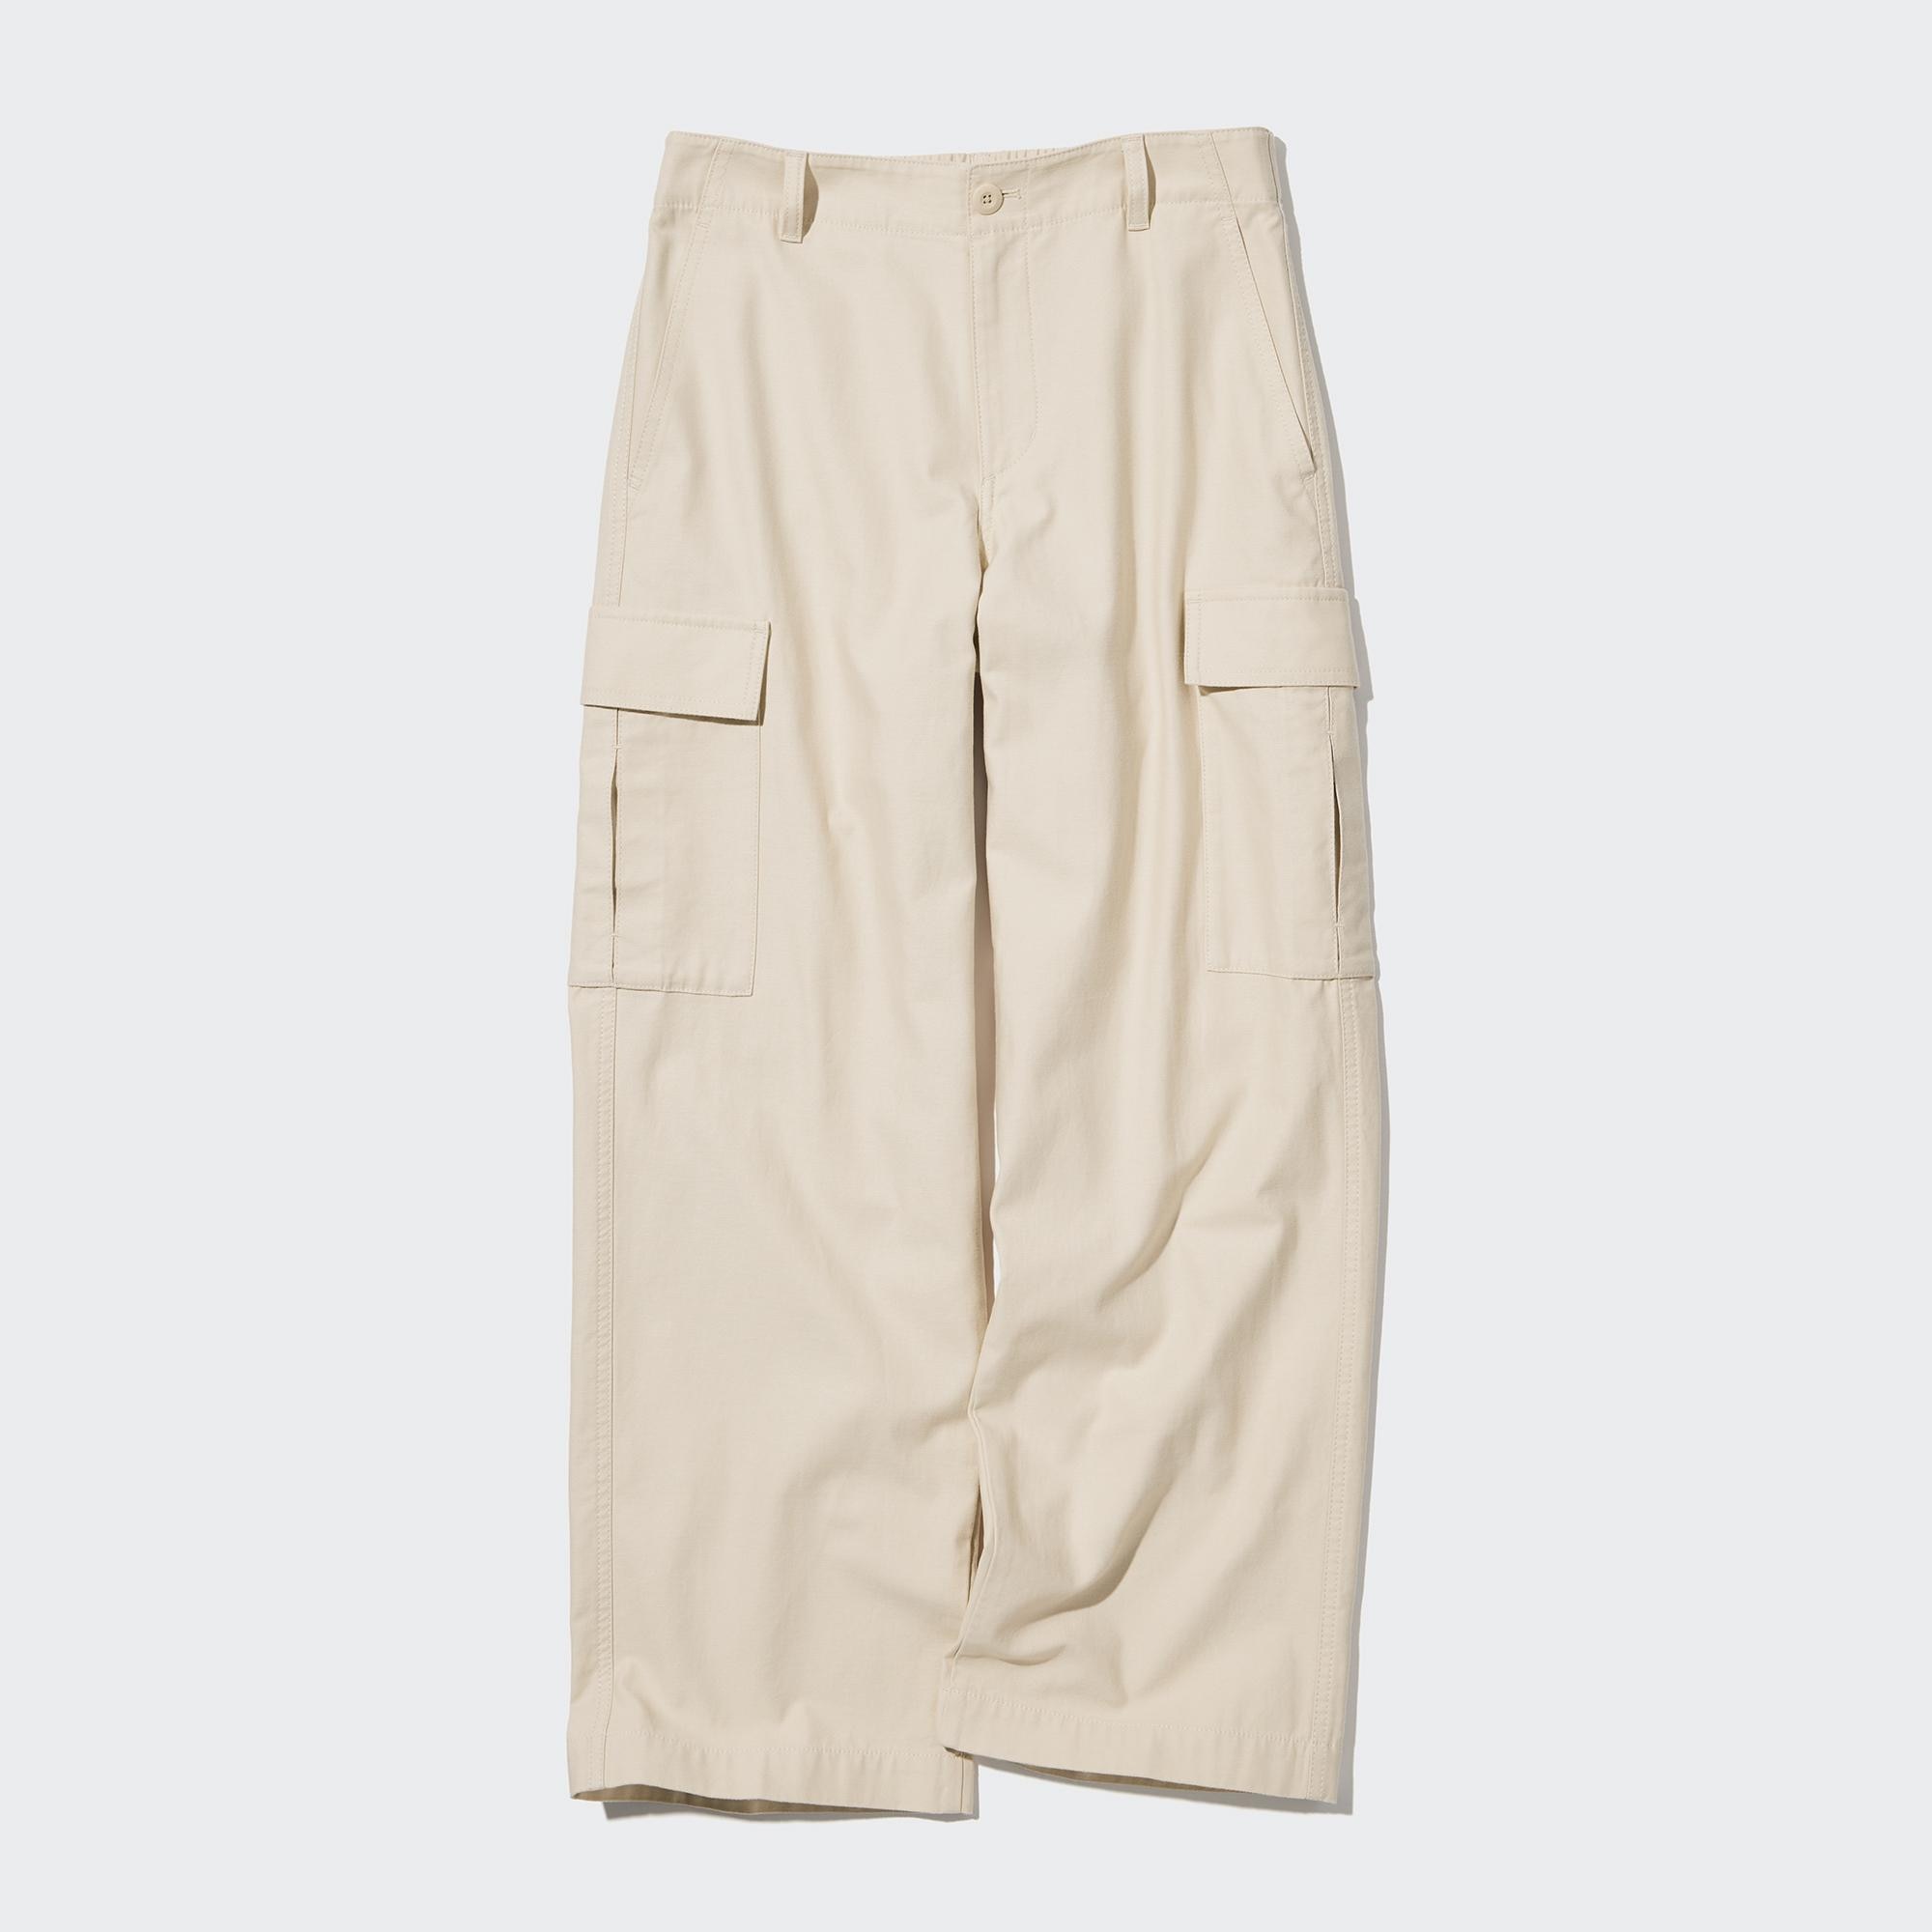 Uniqlo Women Hiking Outdoor Cargo Pants Activewear Polyester Belted XS  24-25